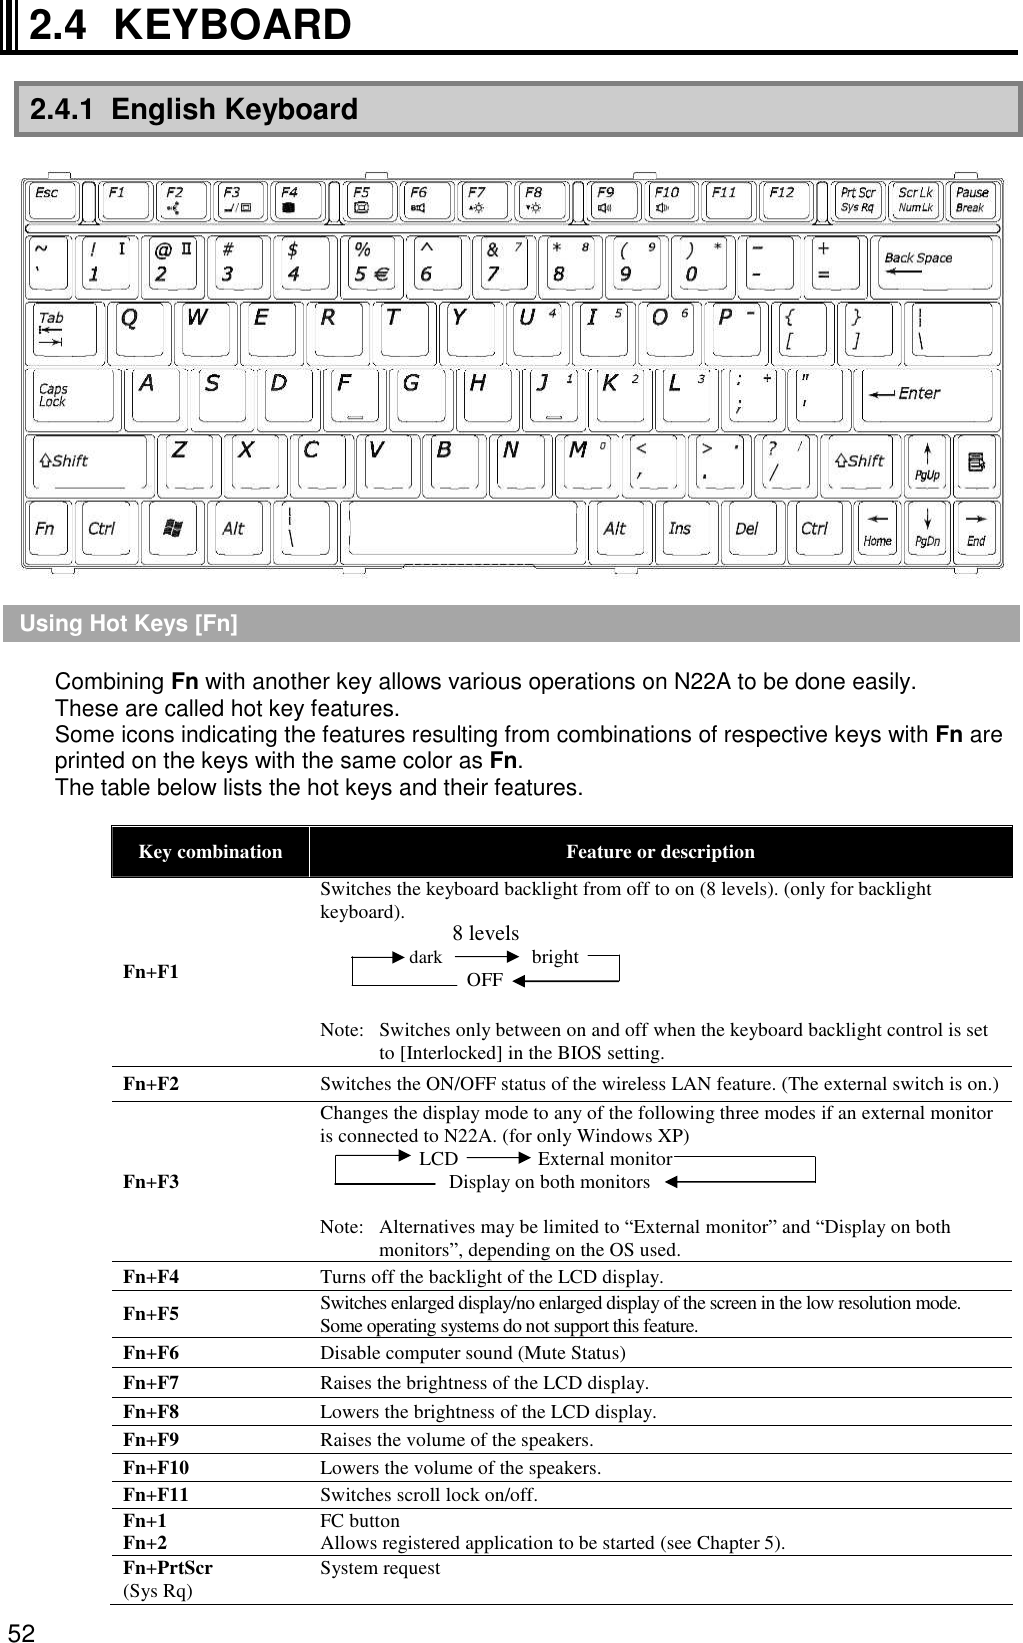 52 2.4  KEYBOARD  2.4.1  English Keyboard    Using Hot Keys [Fn]  Combining Fn with another key allows various operations on N22A to be done easily. These are called hot key features. Some icons indicating the features resulting from combinations of respective keys with Fn are printed on the keys with the same color as Fn. The table below lists the hot keys and their features.  Key combination  Feature or description Fn+F1 Switches the keyboard backlight from off to on (8 levels). (only for backlight keyboard).  dark         bright OFF  Note:  Switches only between on and off when the keyboard backlight control is set to [Interlocked] in the BIOS setting. Fn+F2 Switches the ON/OFF status of the wireless LAN feature. (The external switch is on.) Fn+F3 Changes the display mode to any of the following three modes if an external monitor is connected to N22A. (for only Windows XP)           LCD        External monitor              Display on both monitors  Note:  Alternatives may be limited to “External monitor” and “Display on both monitors”, depending on the OS used. Fn+F4  Turns off the backlight of the LCD display. Fn+F5 Switches enlarged display/no enlarged display of the screen in the low resolution mode. Some operating systems do not support this feature. Fn+F6  Disable computer sound (Mute Status) Fn+F7  Raises the brightness of the LCD display. Fn+F8  Lowers the brightness of the LCD display. Fn+F9  Raises the volume of the speakers. Fn+F10  Lowers the volume of the speakers. Fn+F11 Switches scroll lock on/off. Fn+1 Fn+2 FC button Allows registered application to be started (see Chapter 5). Fn+PrtScr (Sys Rq)  System request  8 levels ⑤ 